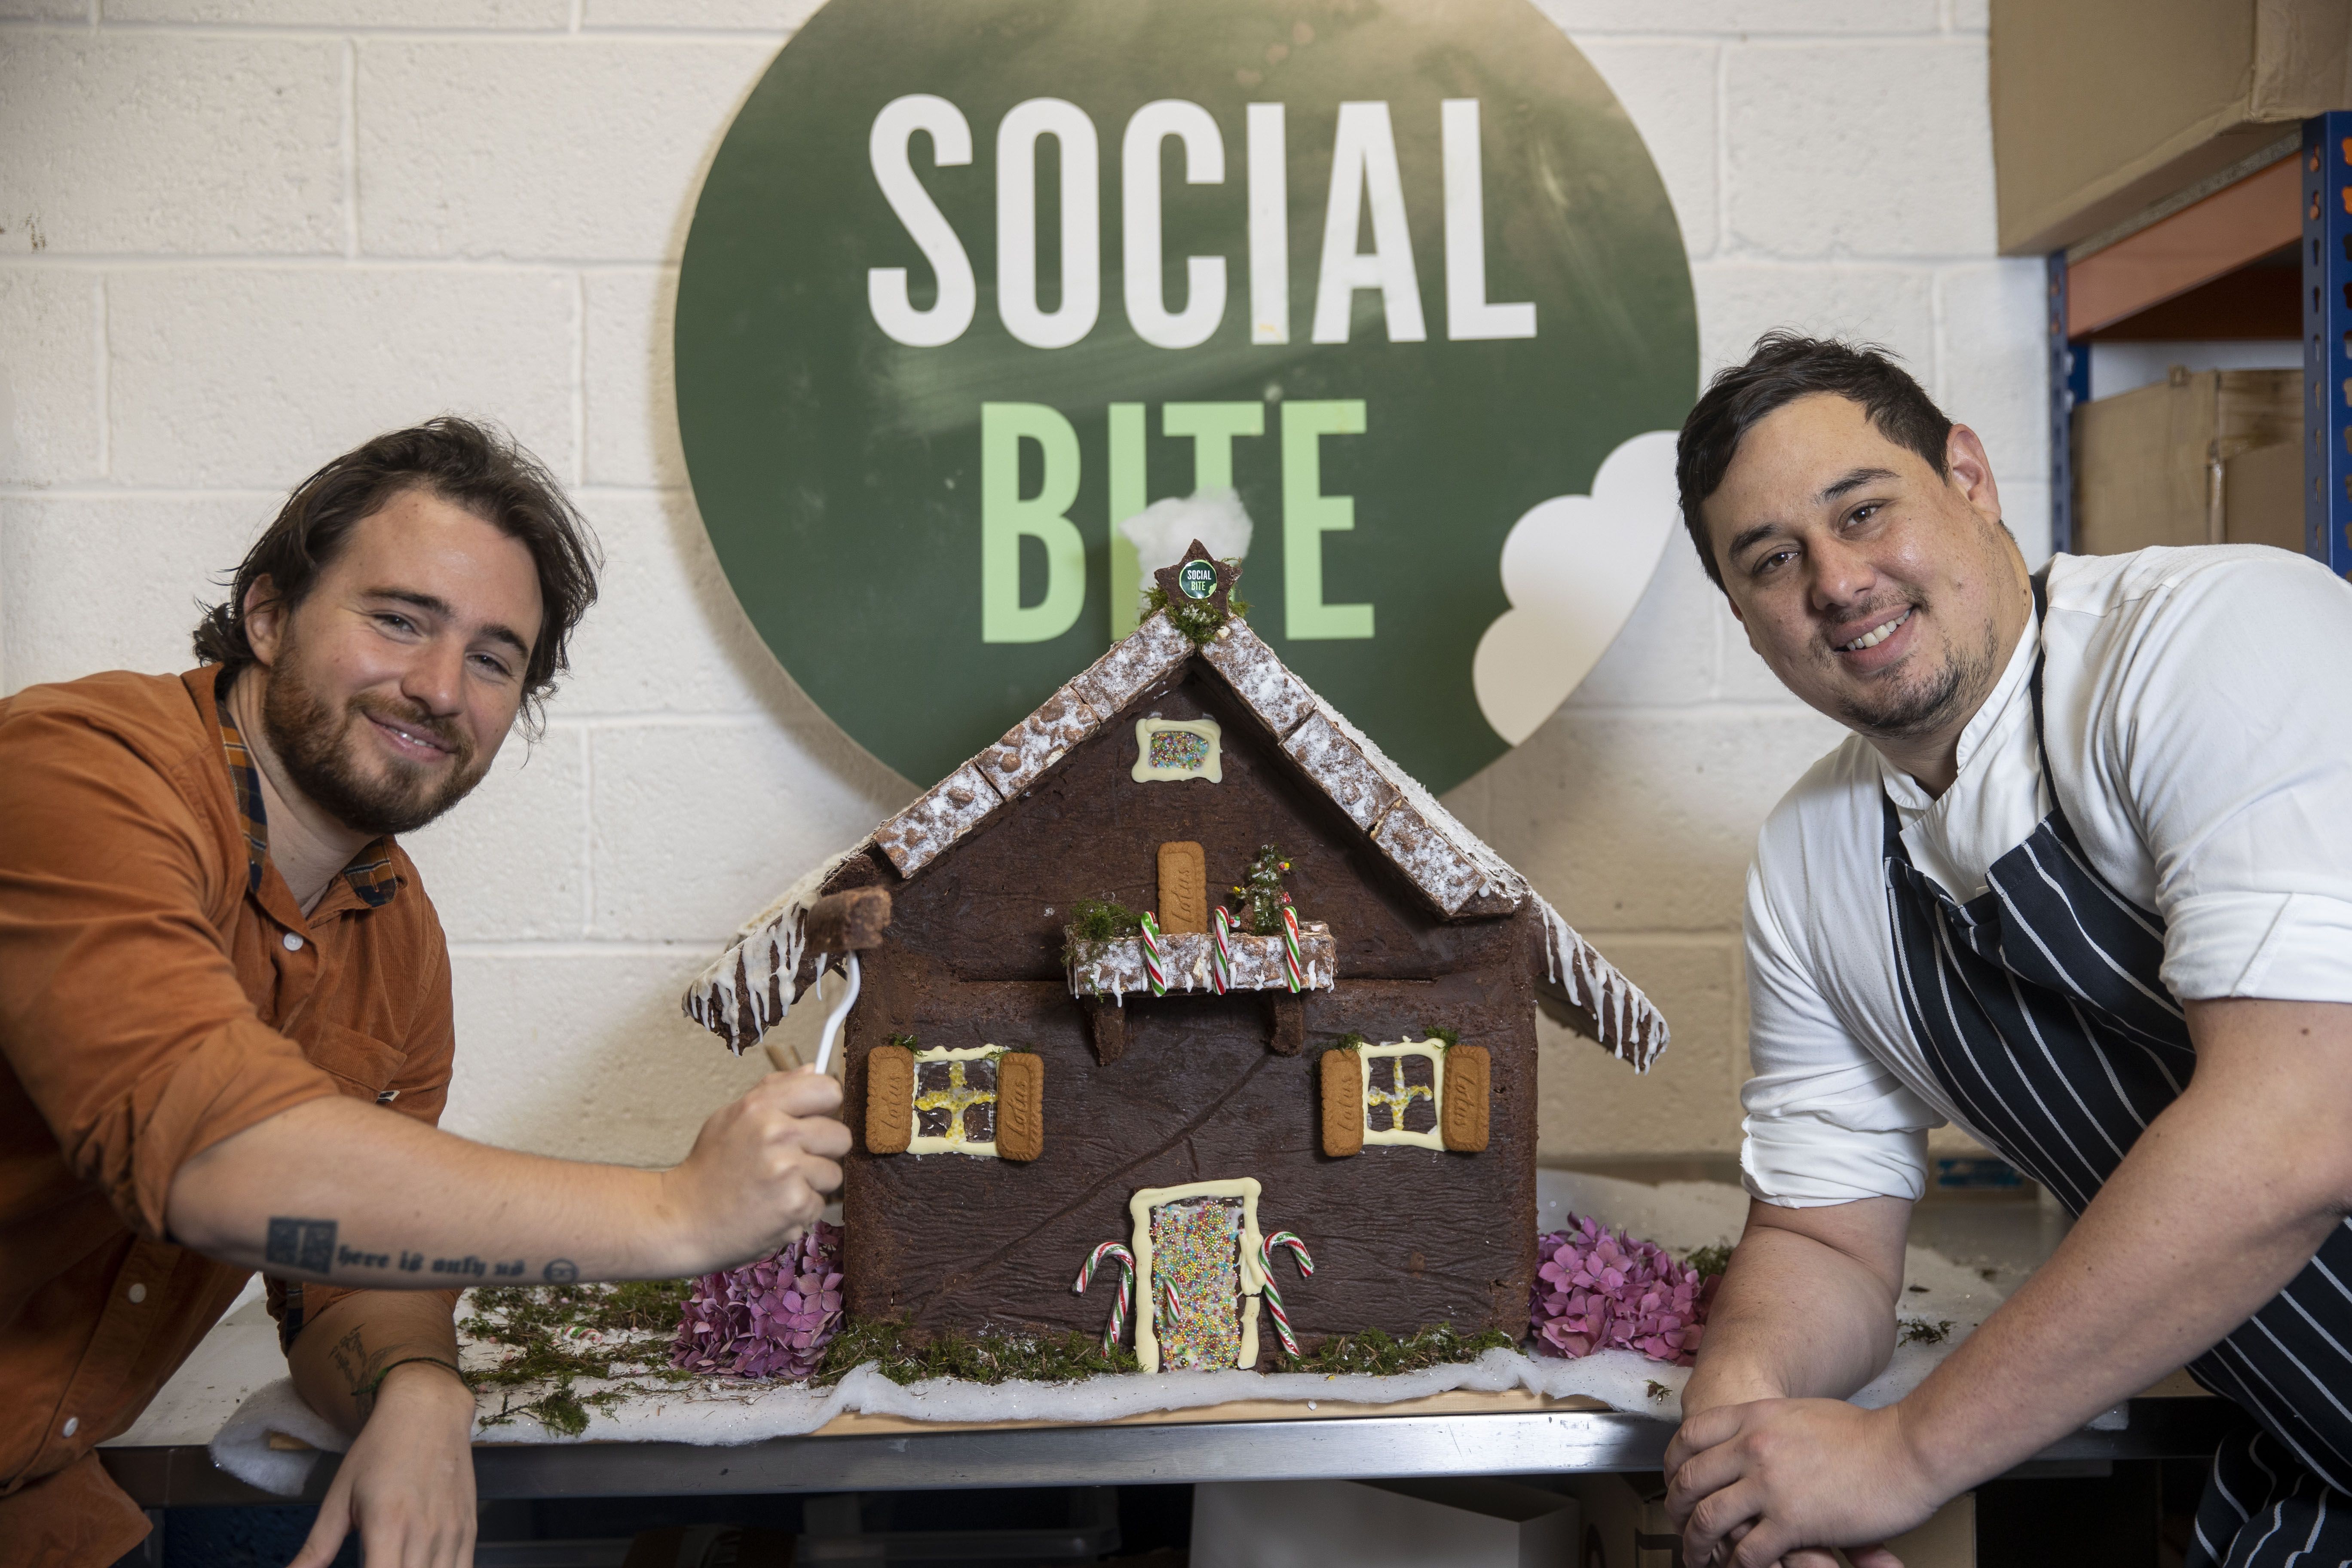 Social Bite launches sweet new campaign to help end homelessness